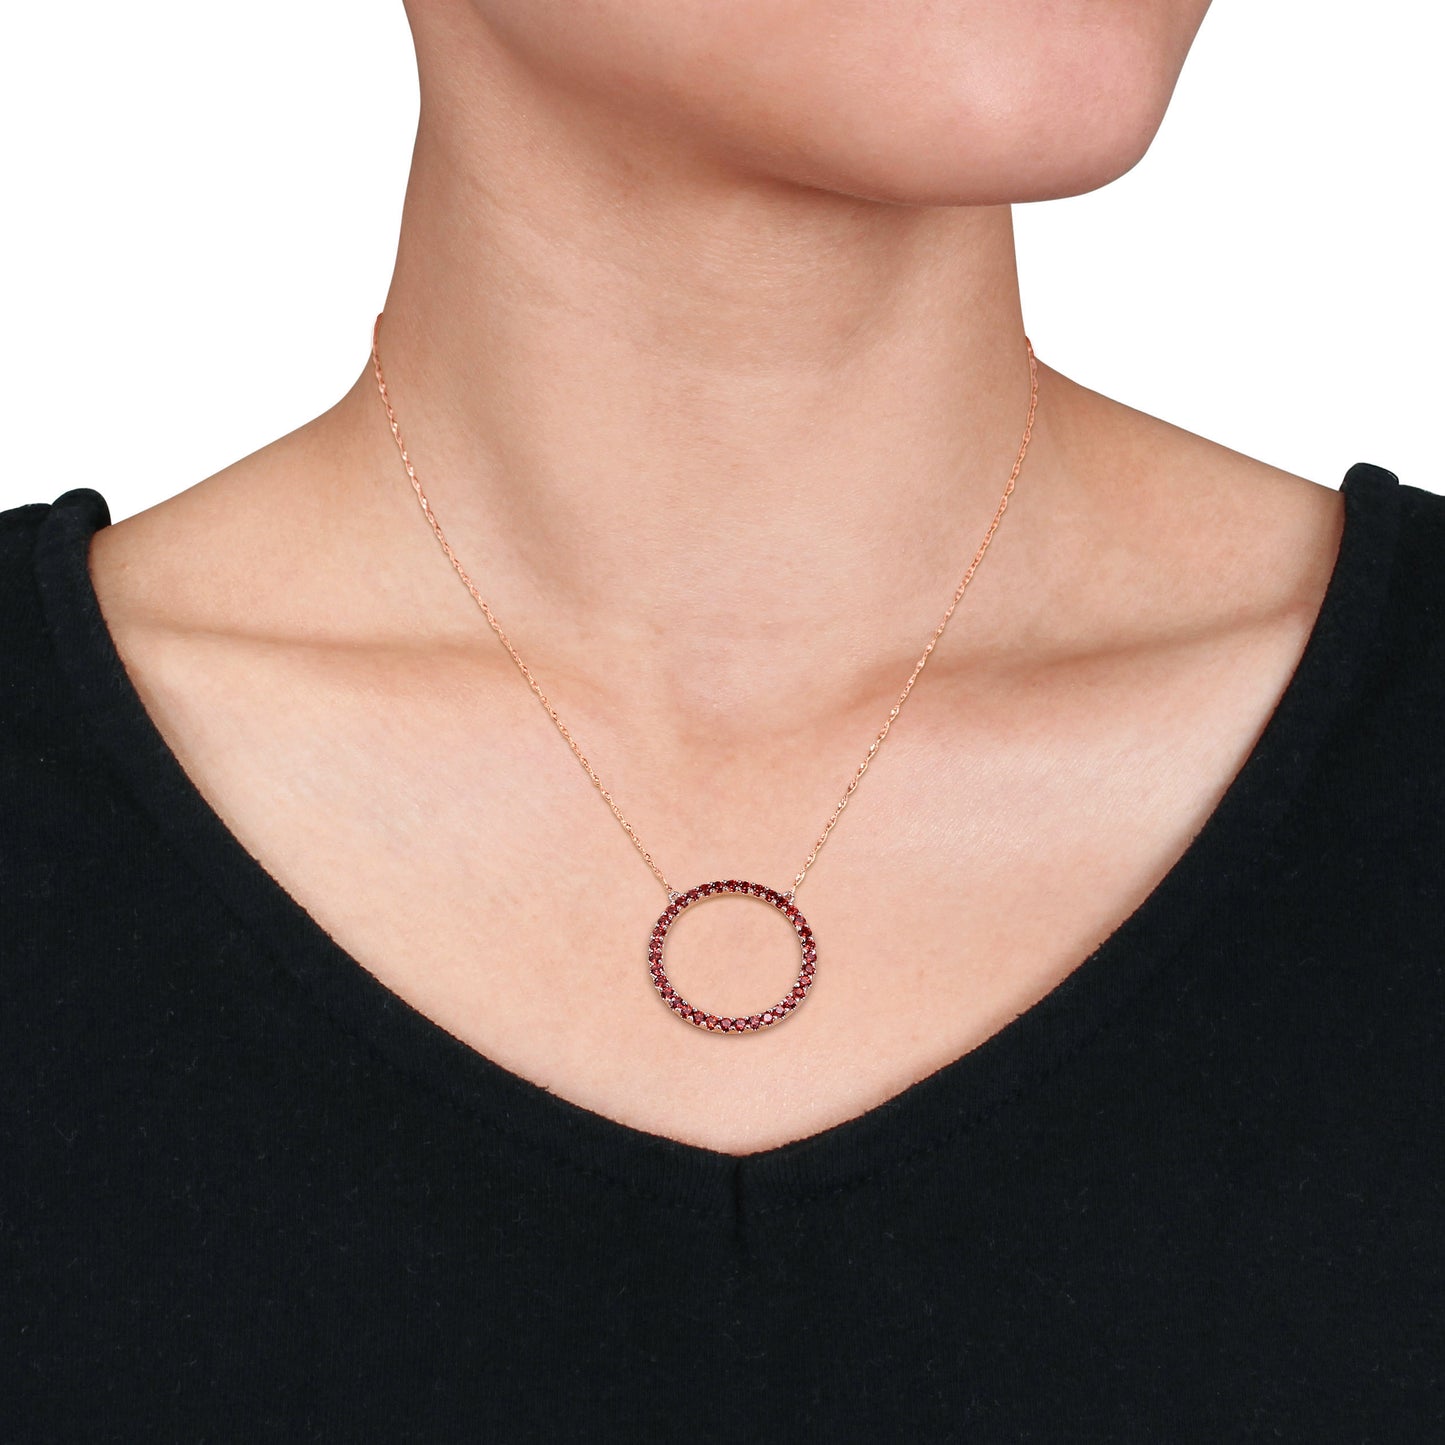 1 3/8ct Garnet Open Circle Necklace in 10k Rose Gold